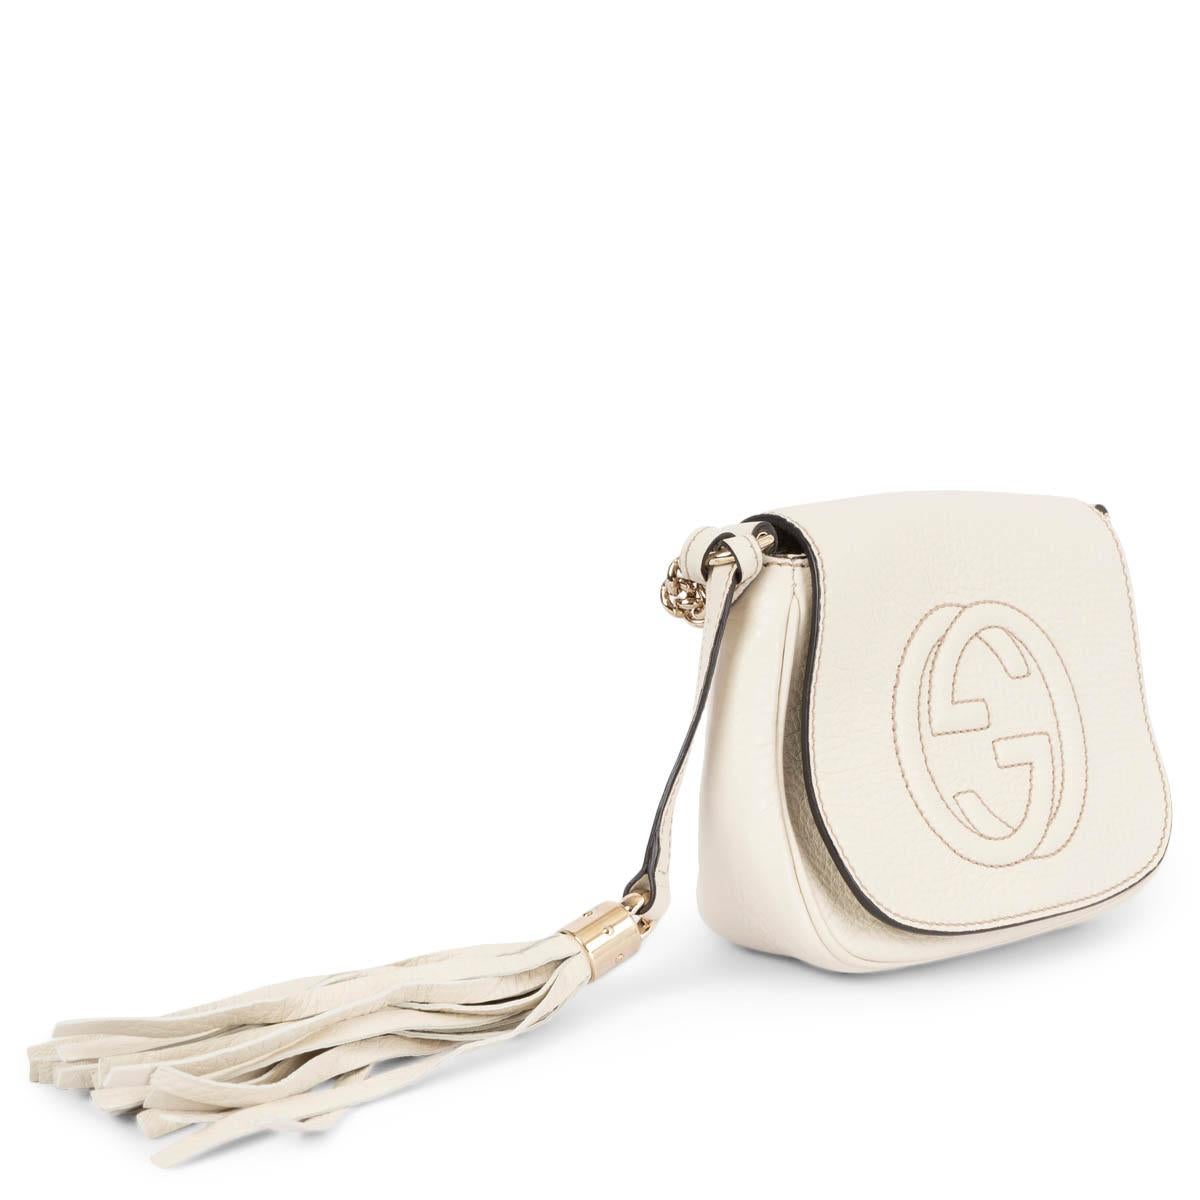 100% authentic Gucci Small Soho flap crossbody bag in ivory peppled calfskin leather. Features a debossed GG logo on the front, a tassel and light gold-tone chain. Opens with a magnetic button under the flap and is lined in off-white canvas with one